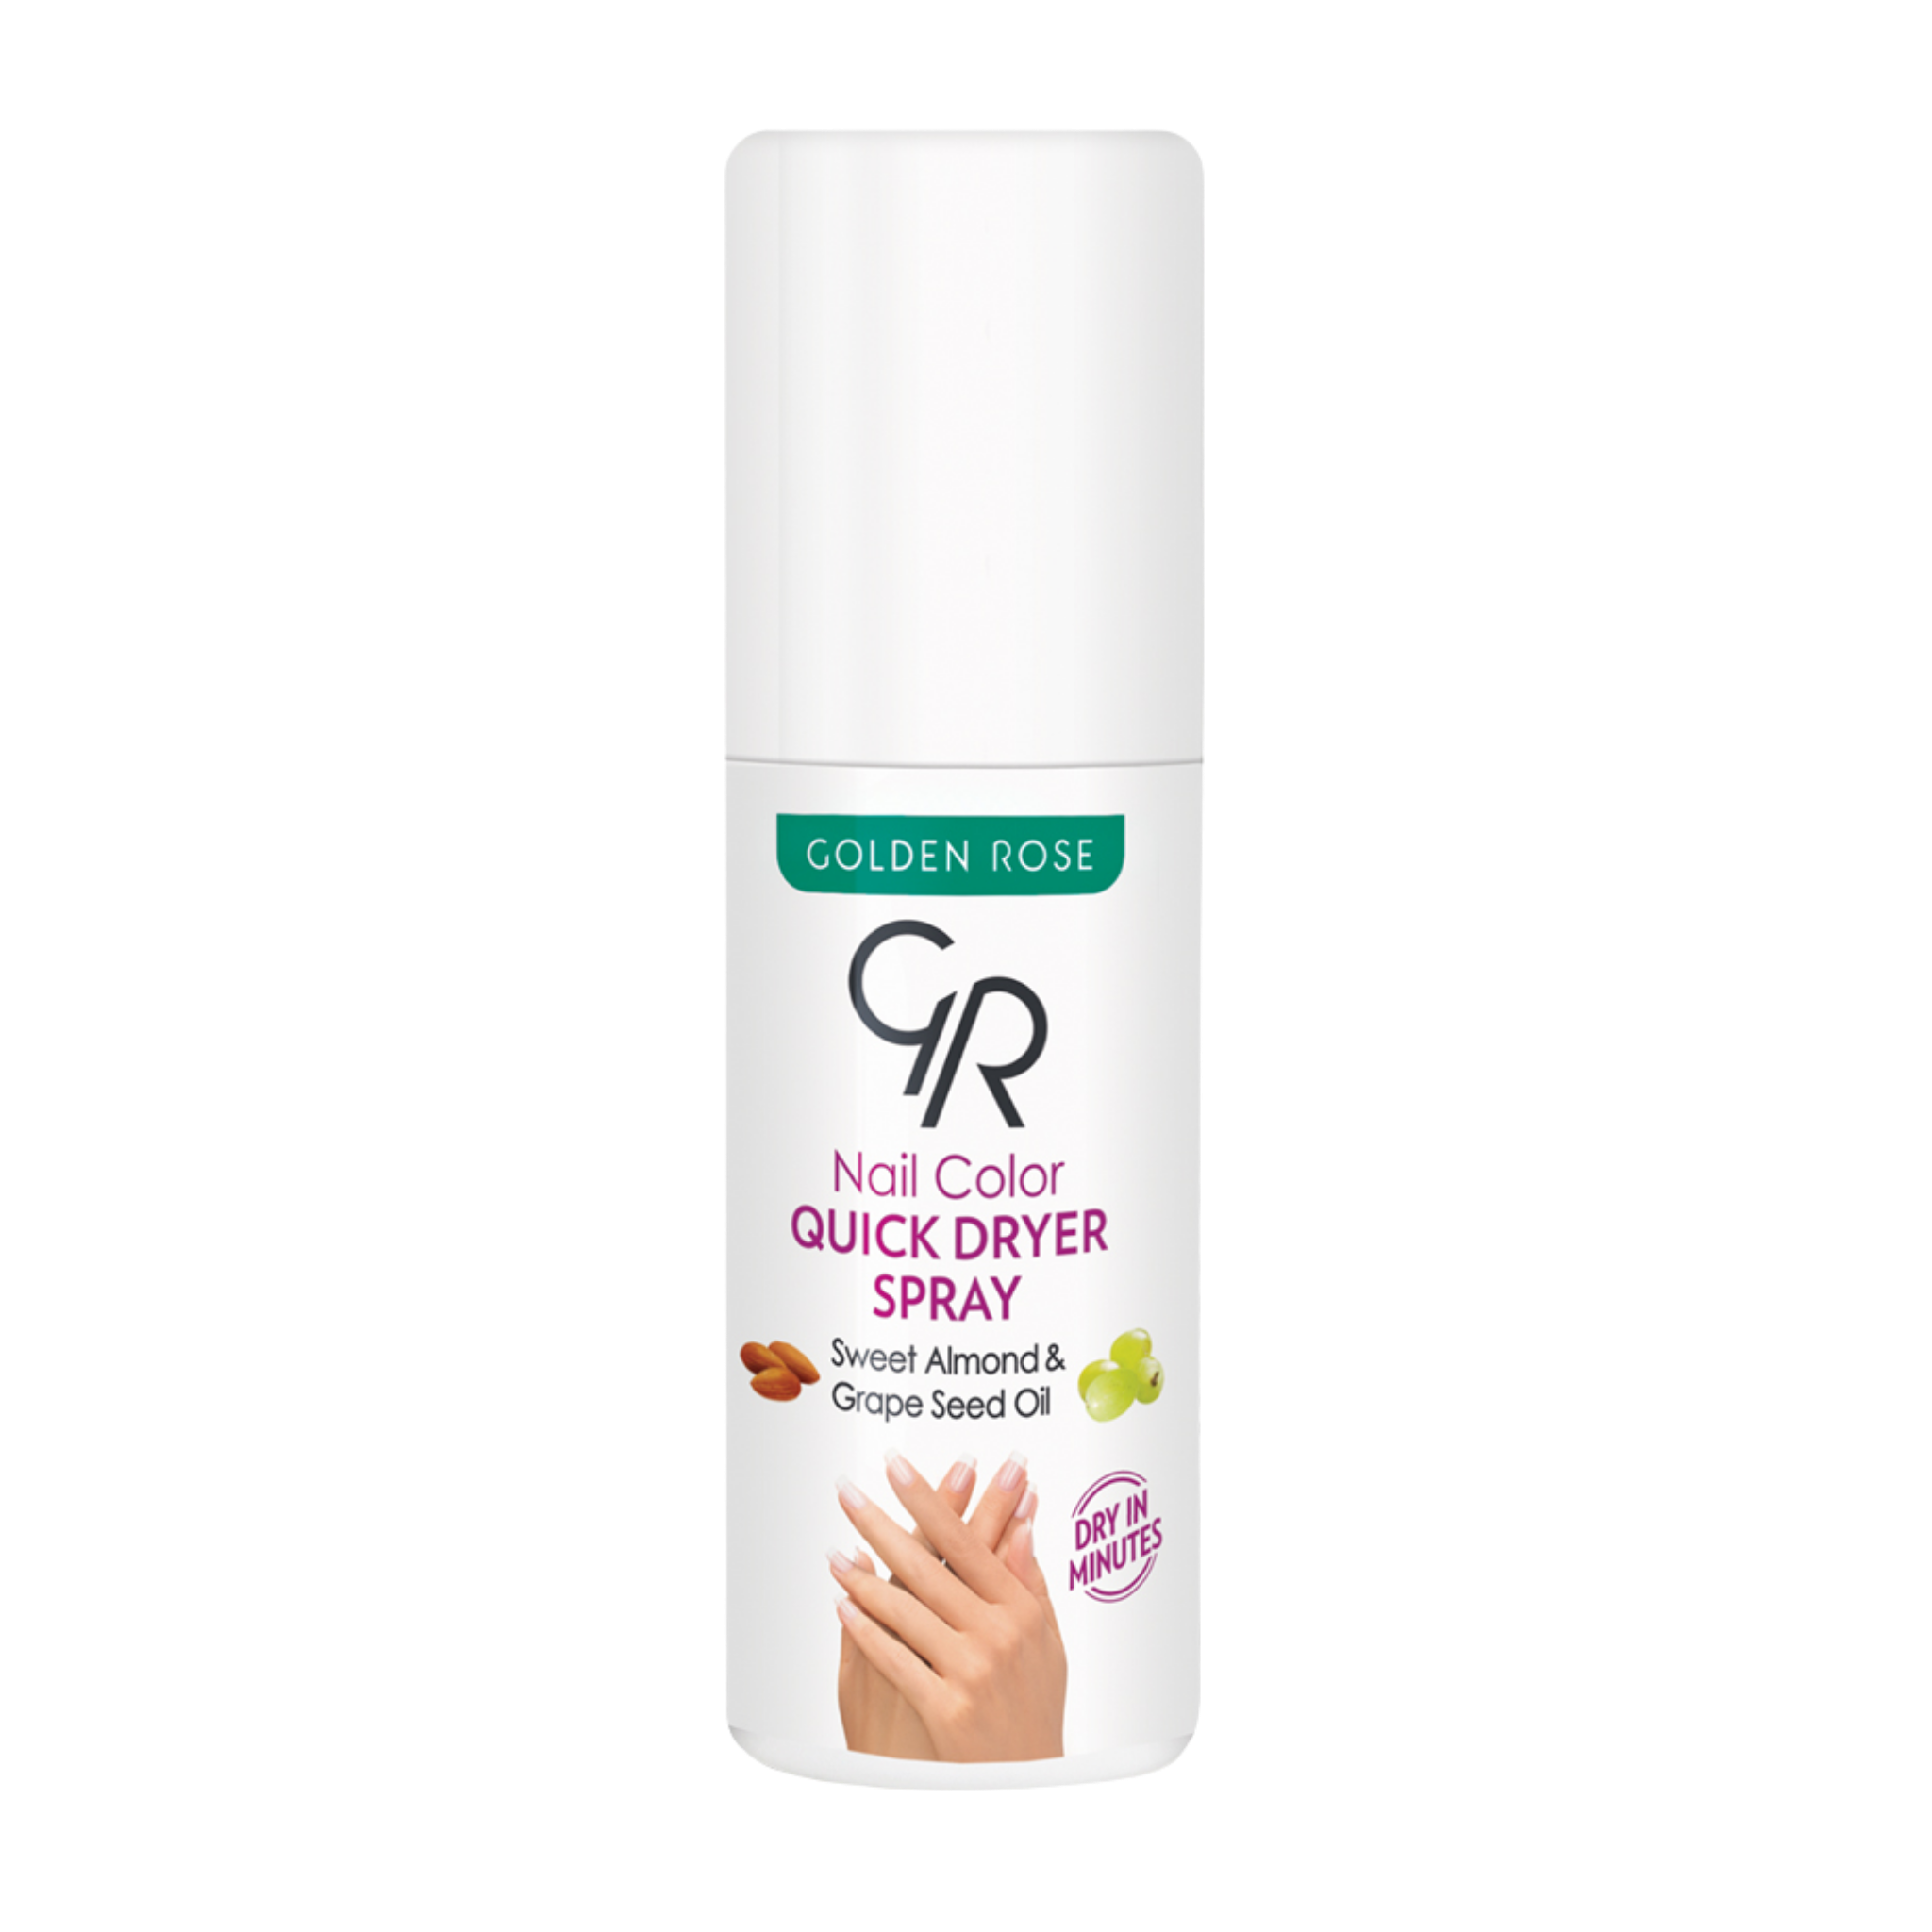 NAIL COLOR QUICK DRYER SPRAY